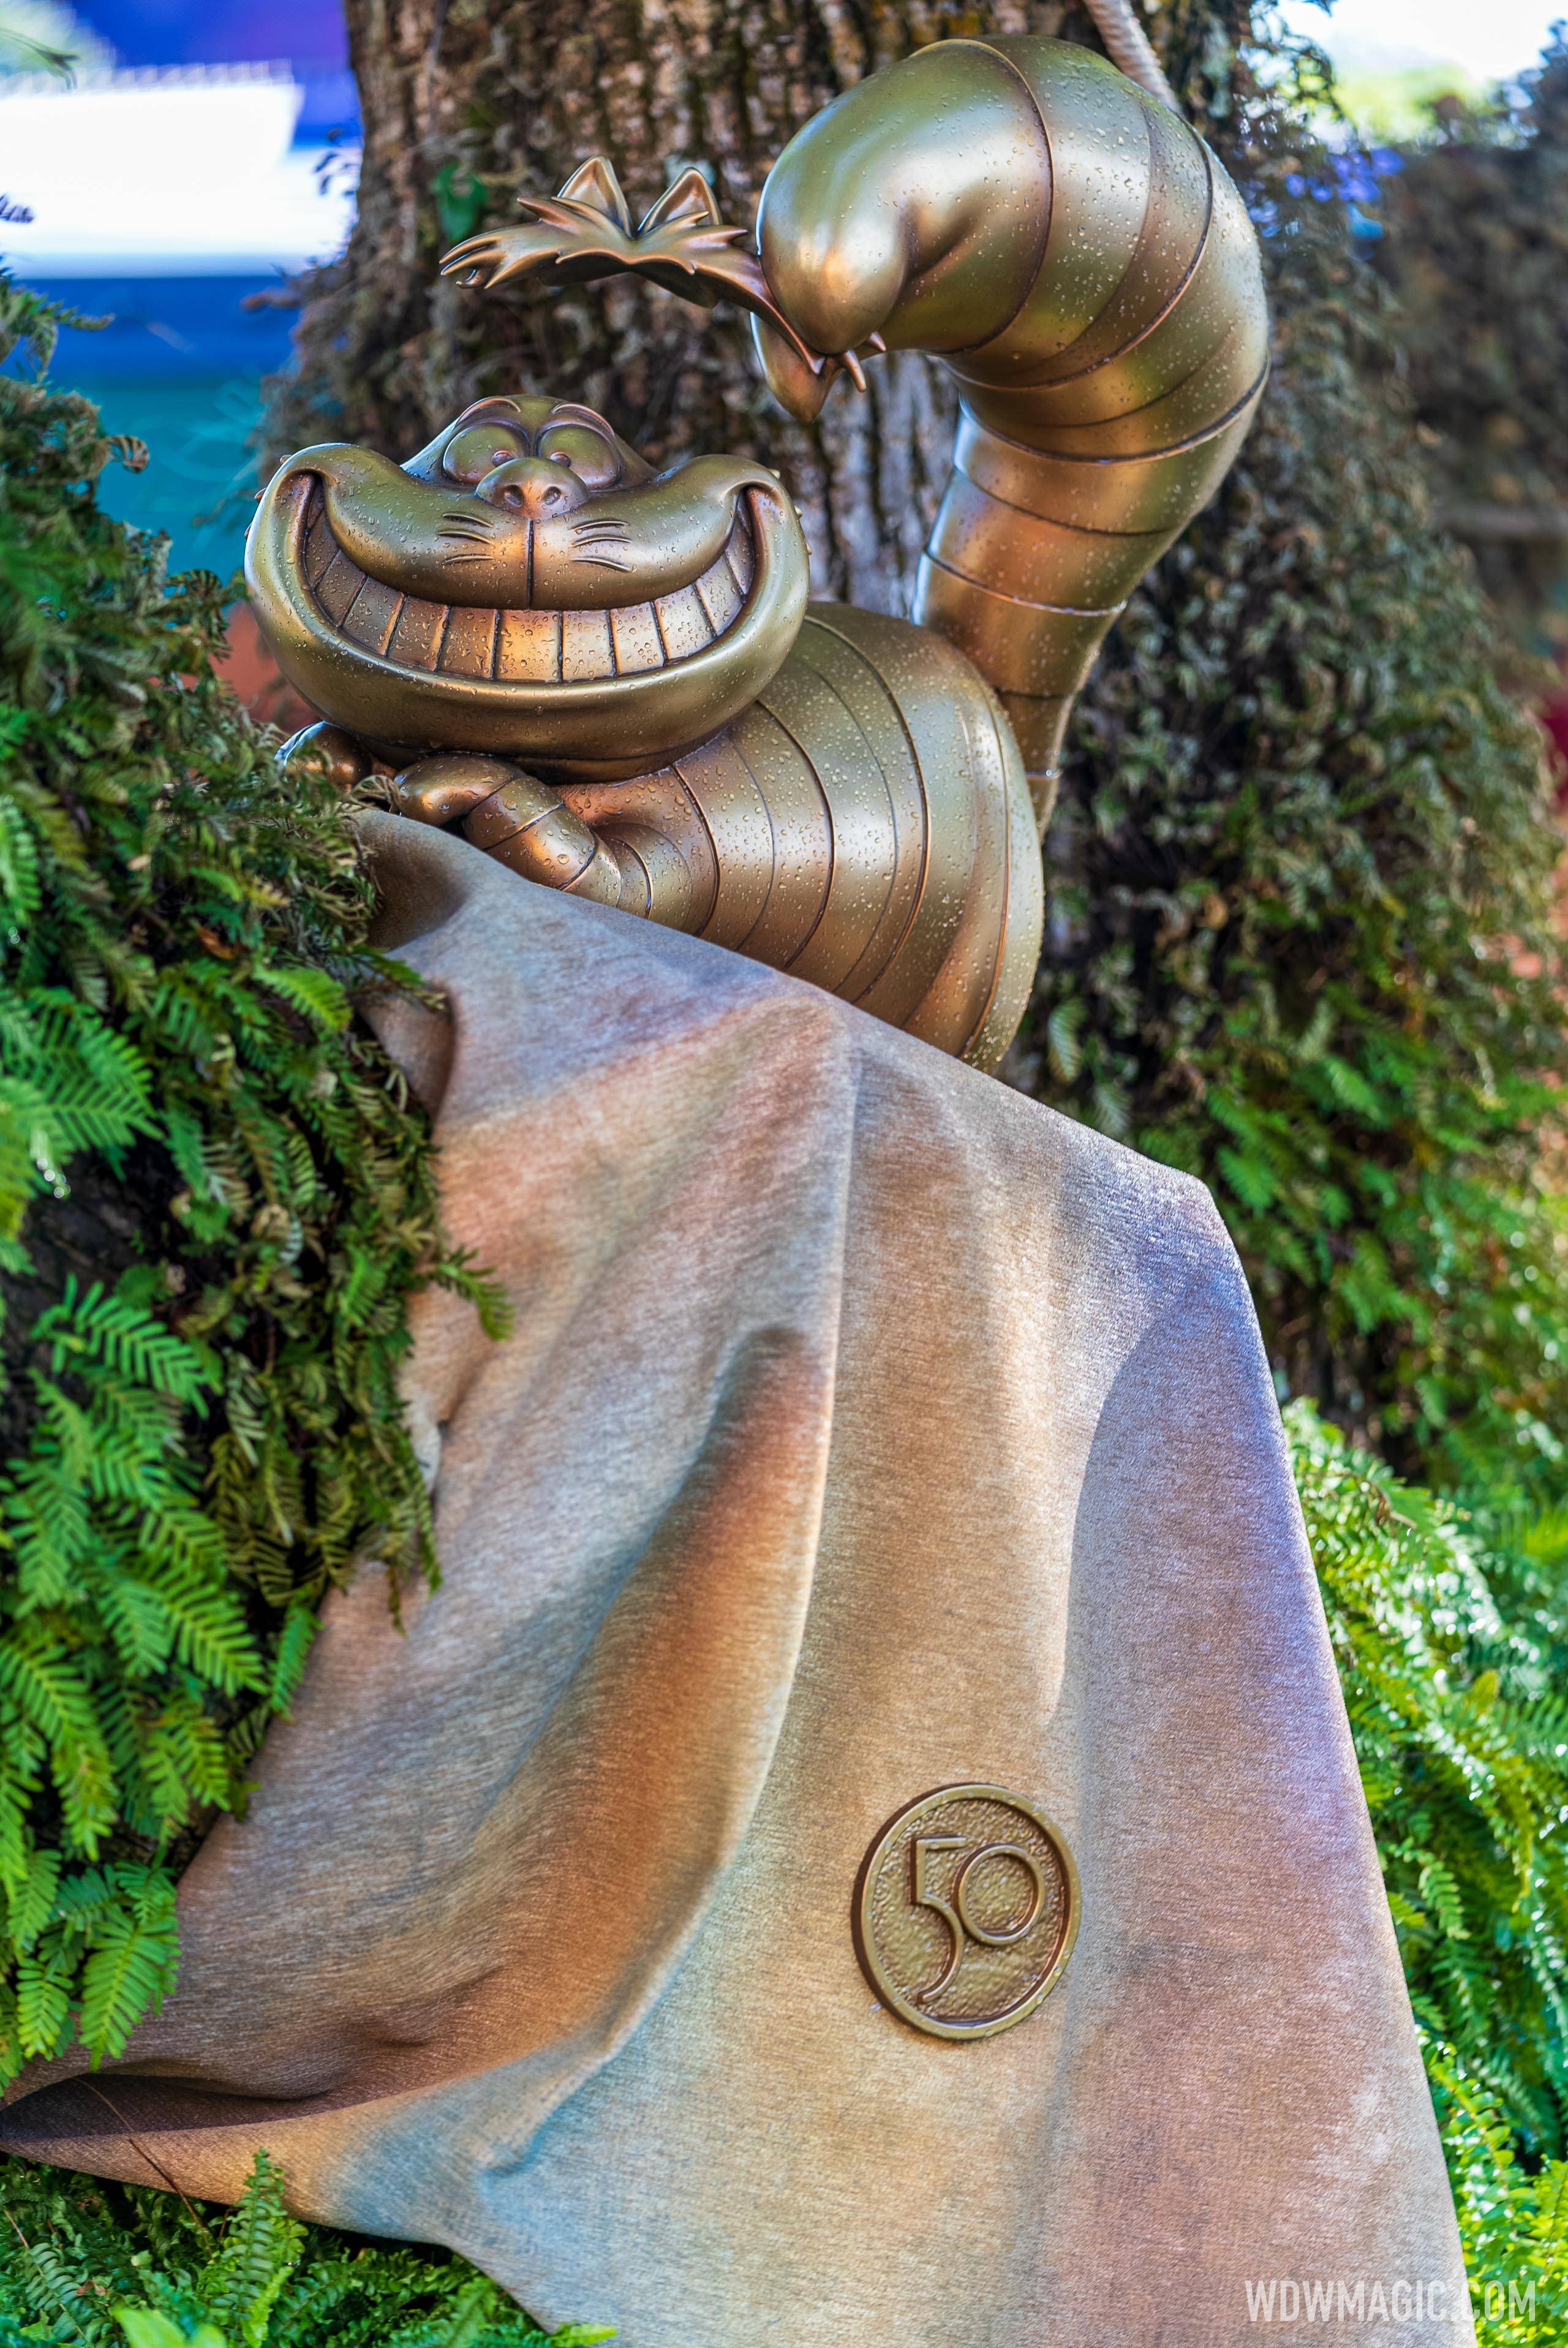 Cheshire Cat - Fab 50 Character Statue